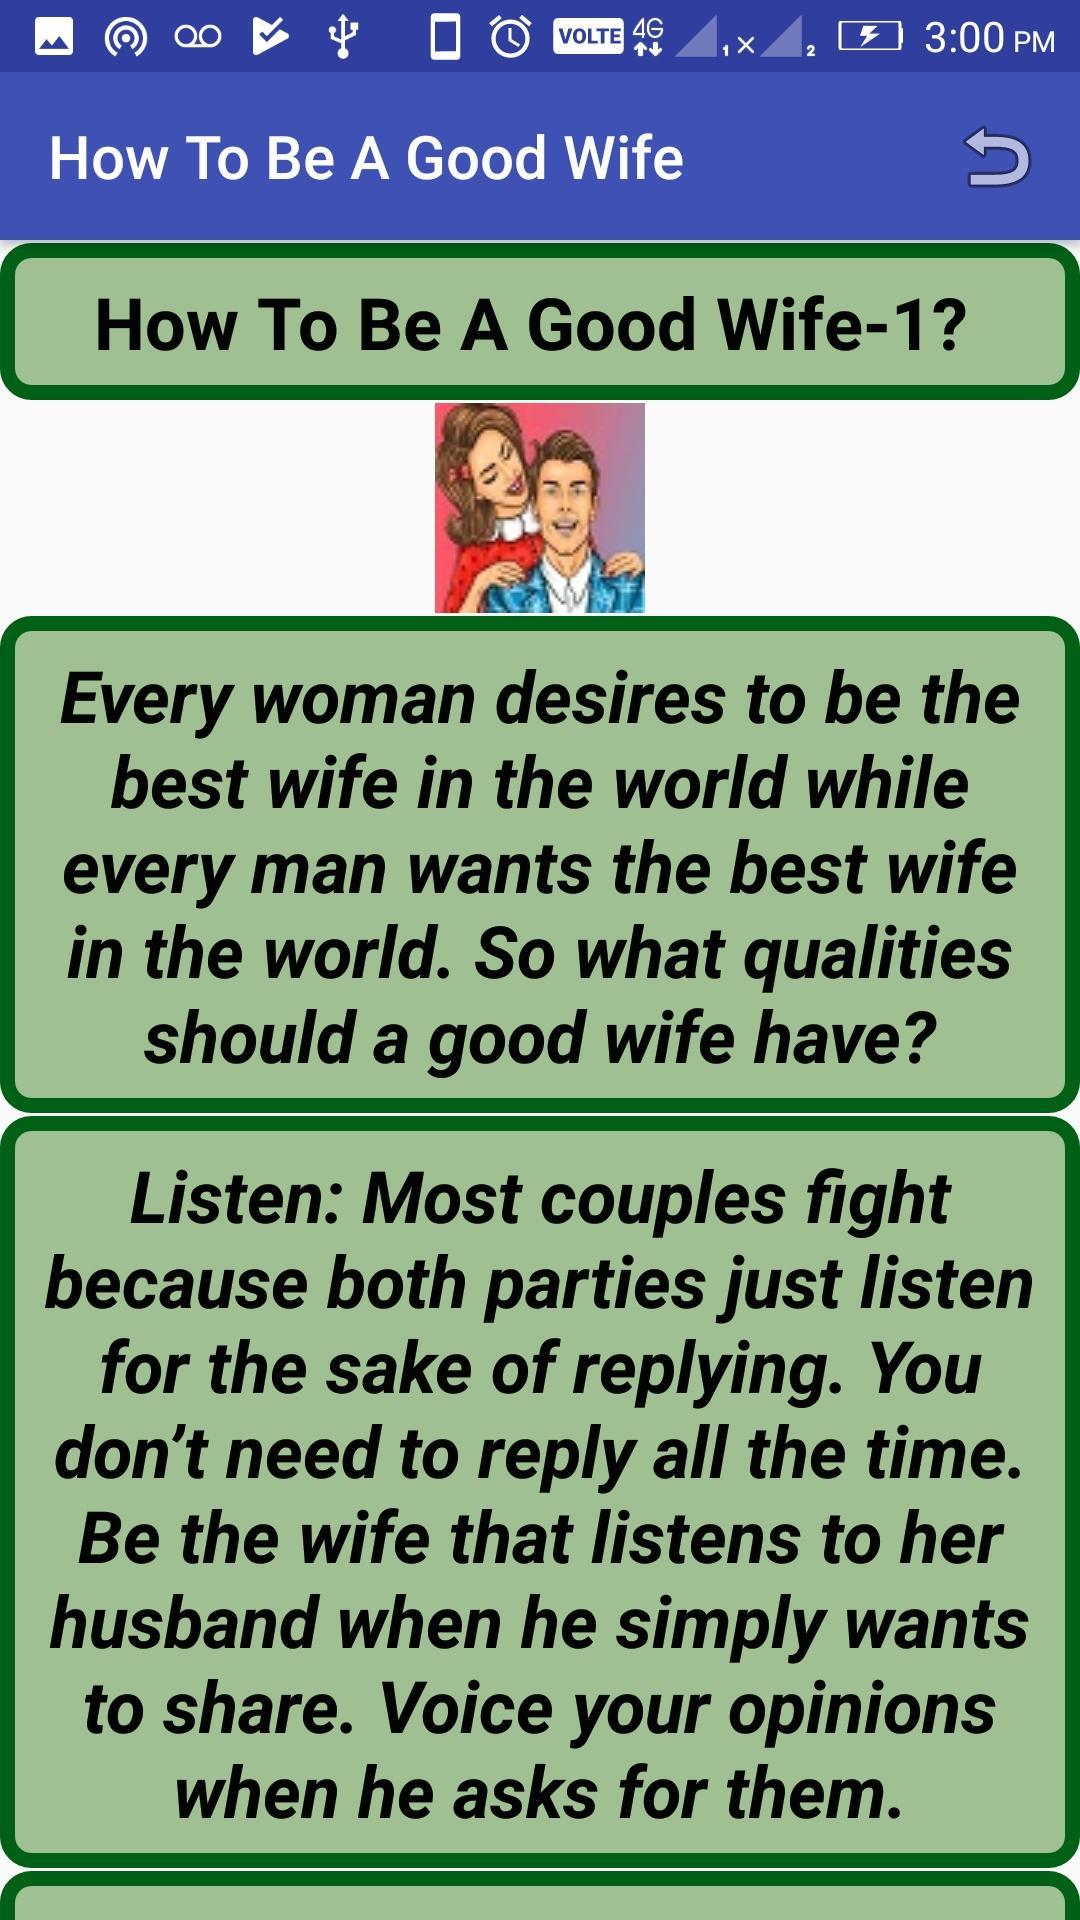 Qualities good of are a what husband the 6 Qualities